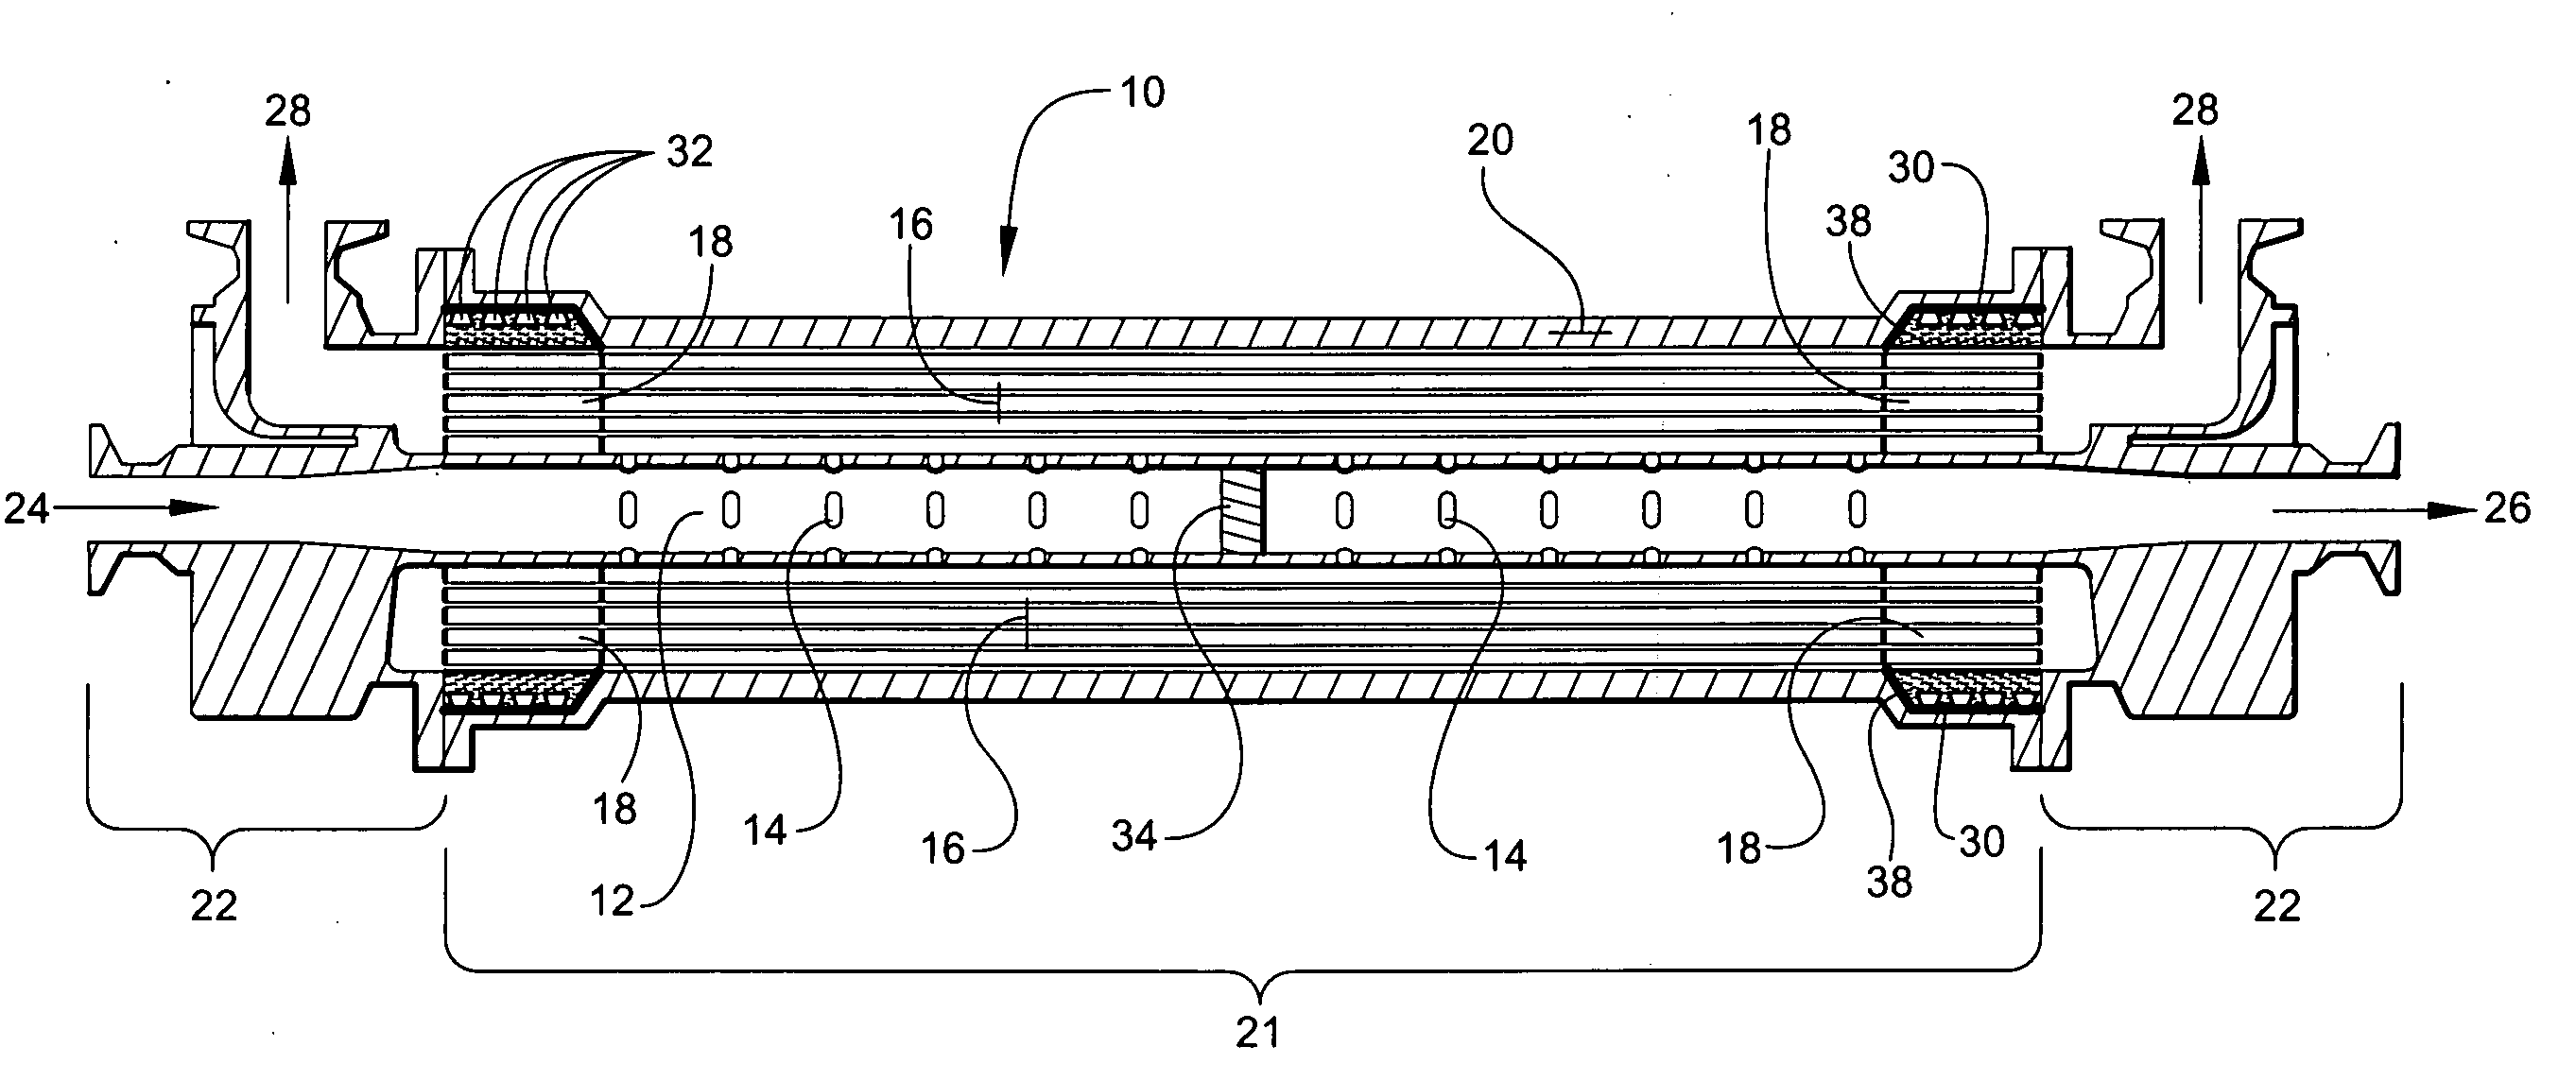 Hollow fiber membrane contactor and method of making same